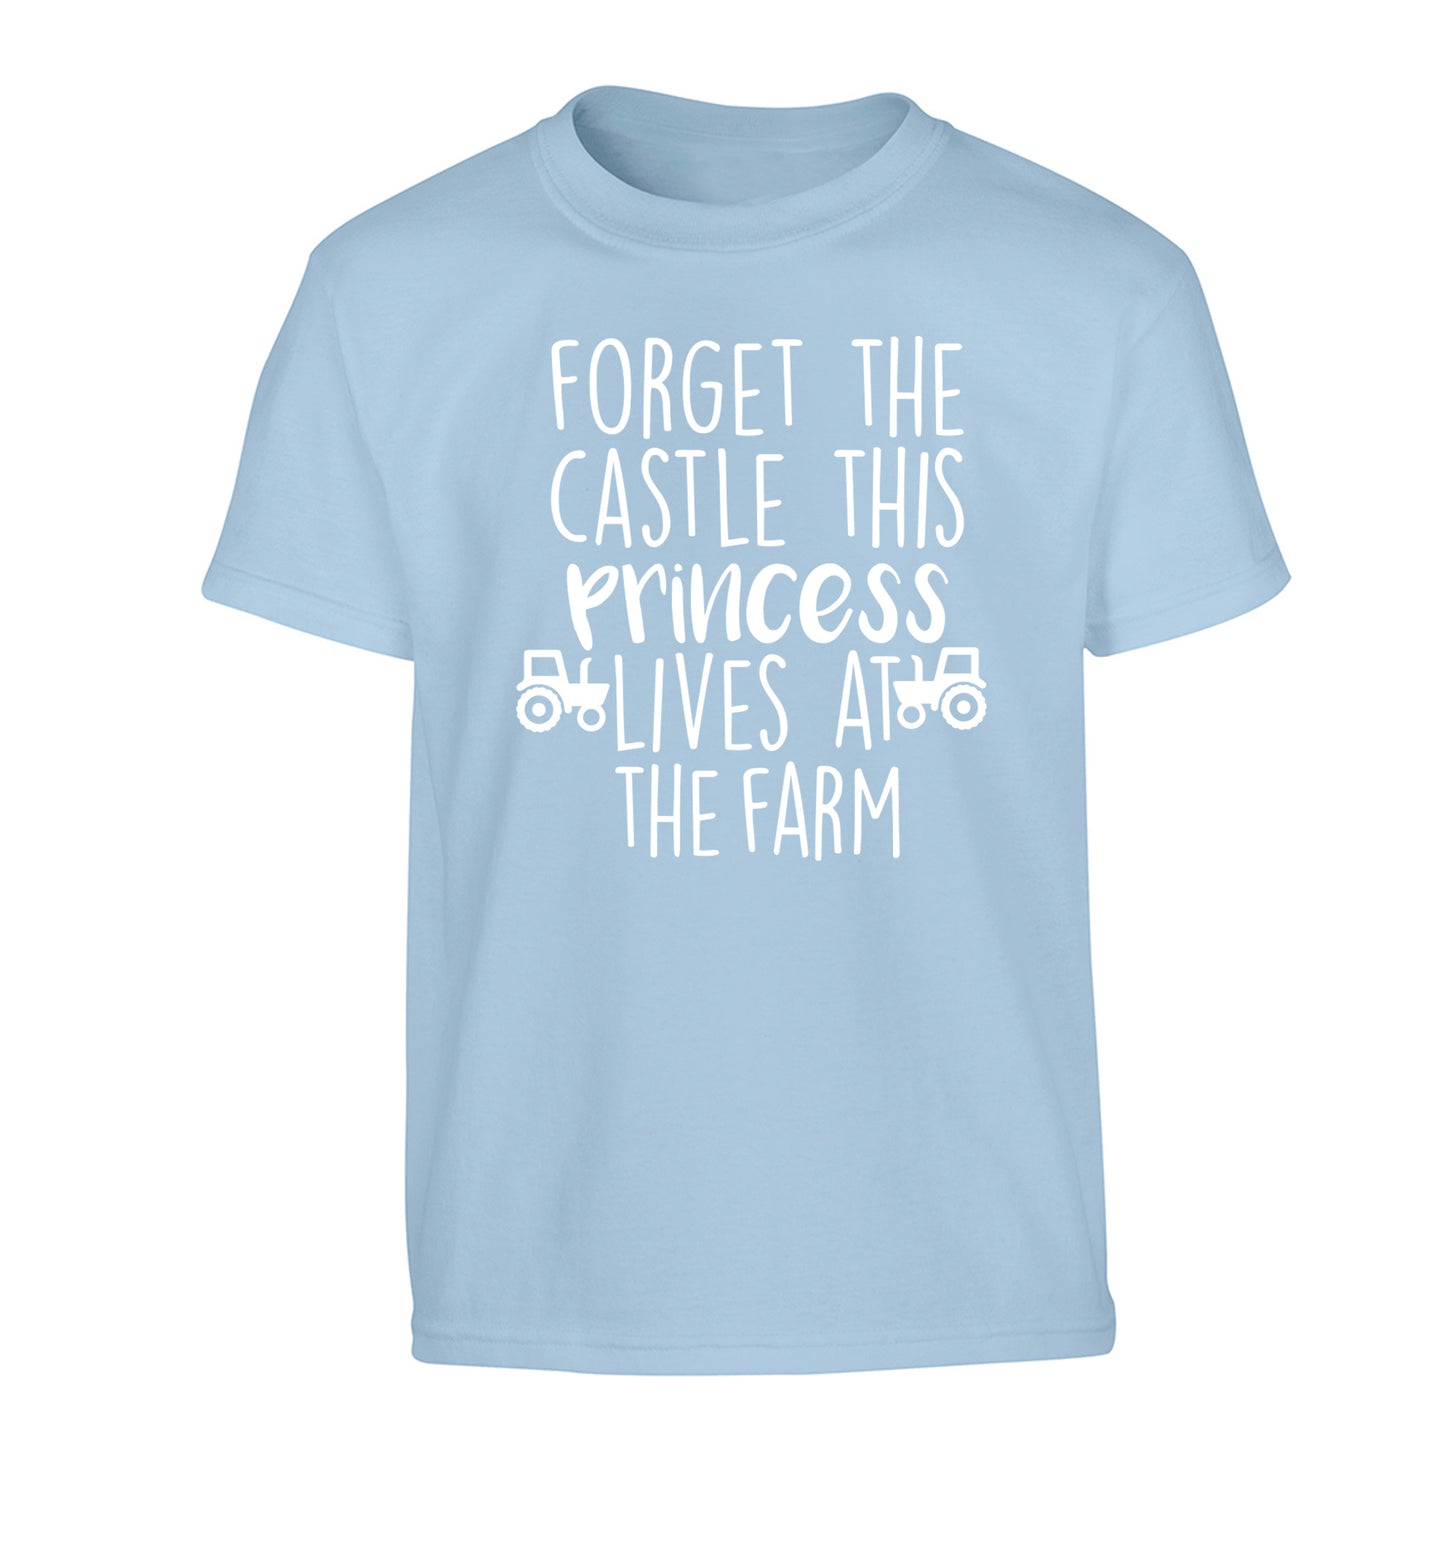 Forget the castle this princess lives at the farm Children's light blue Tshirt 12-14 Years